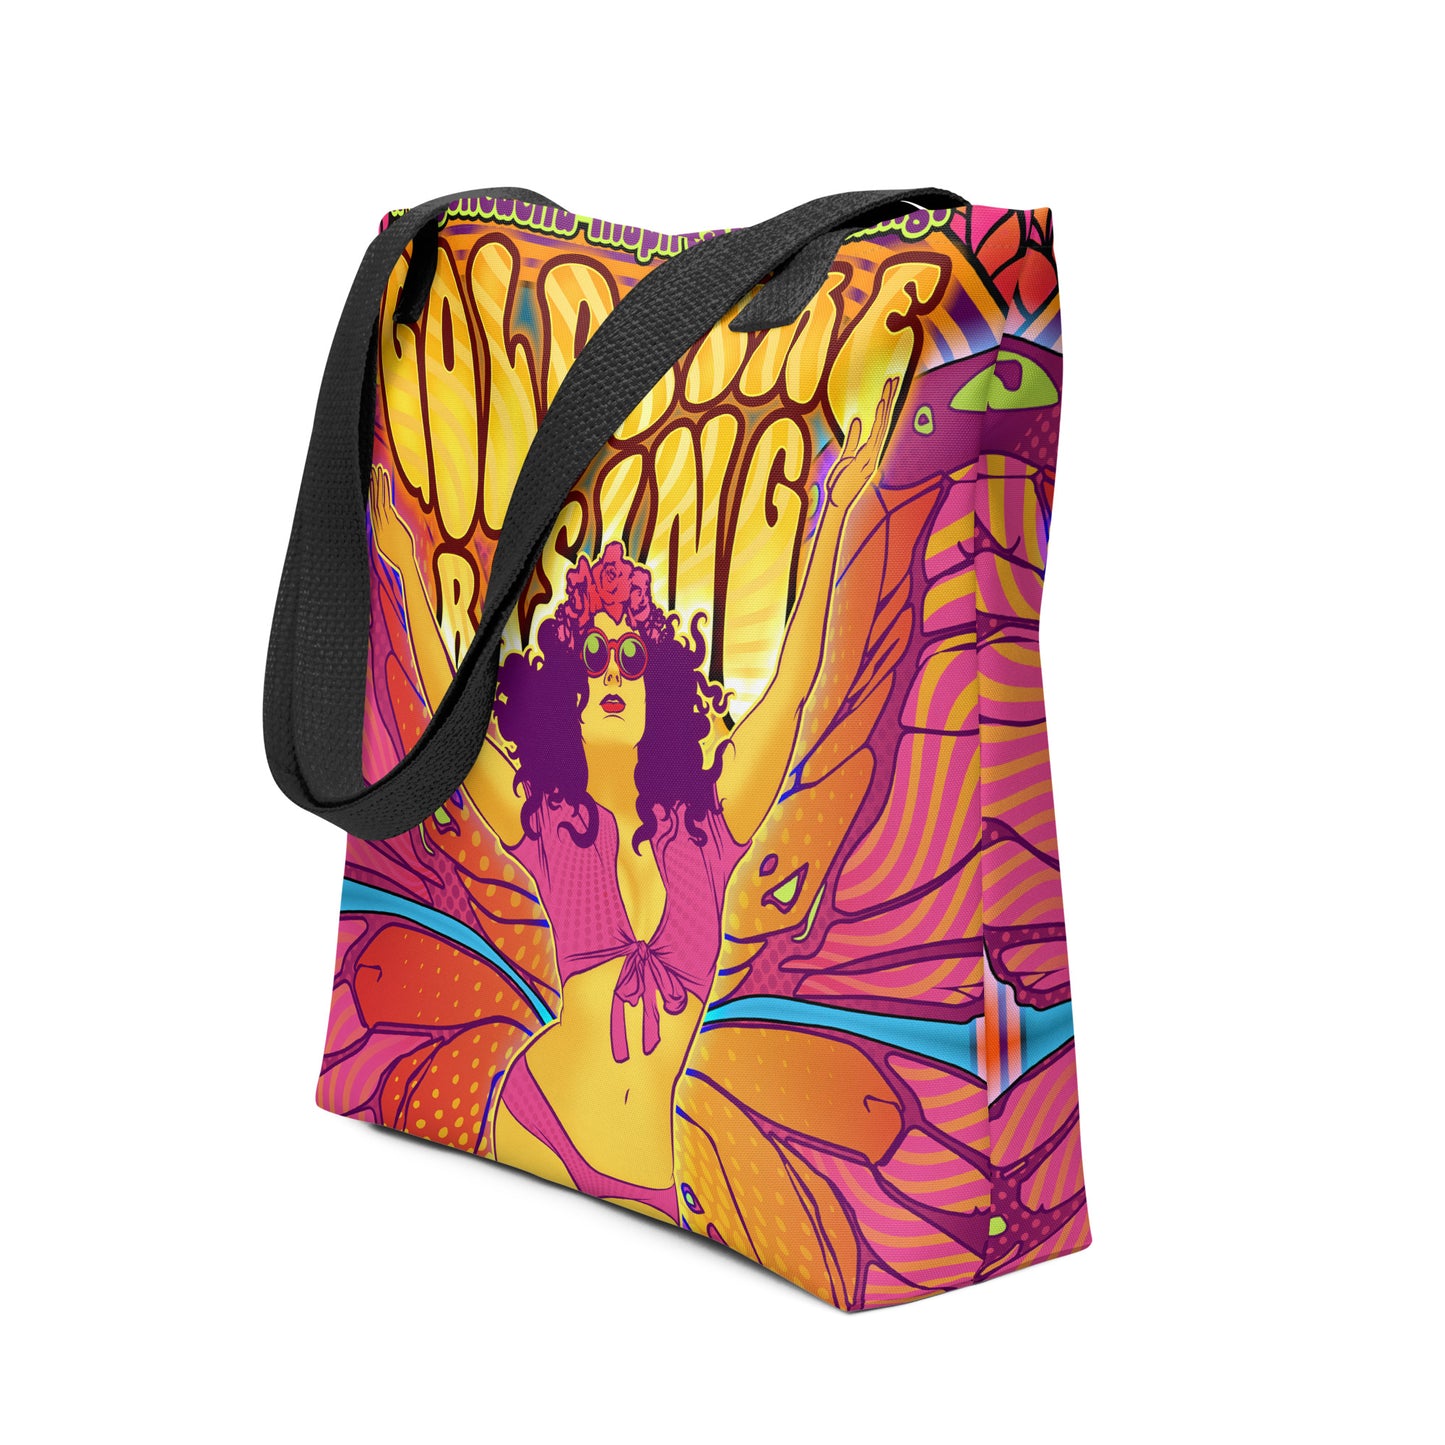 Psychedelic Psyche Tote bag